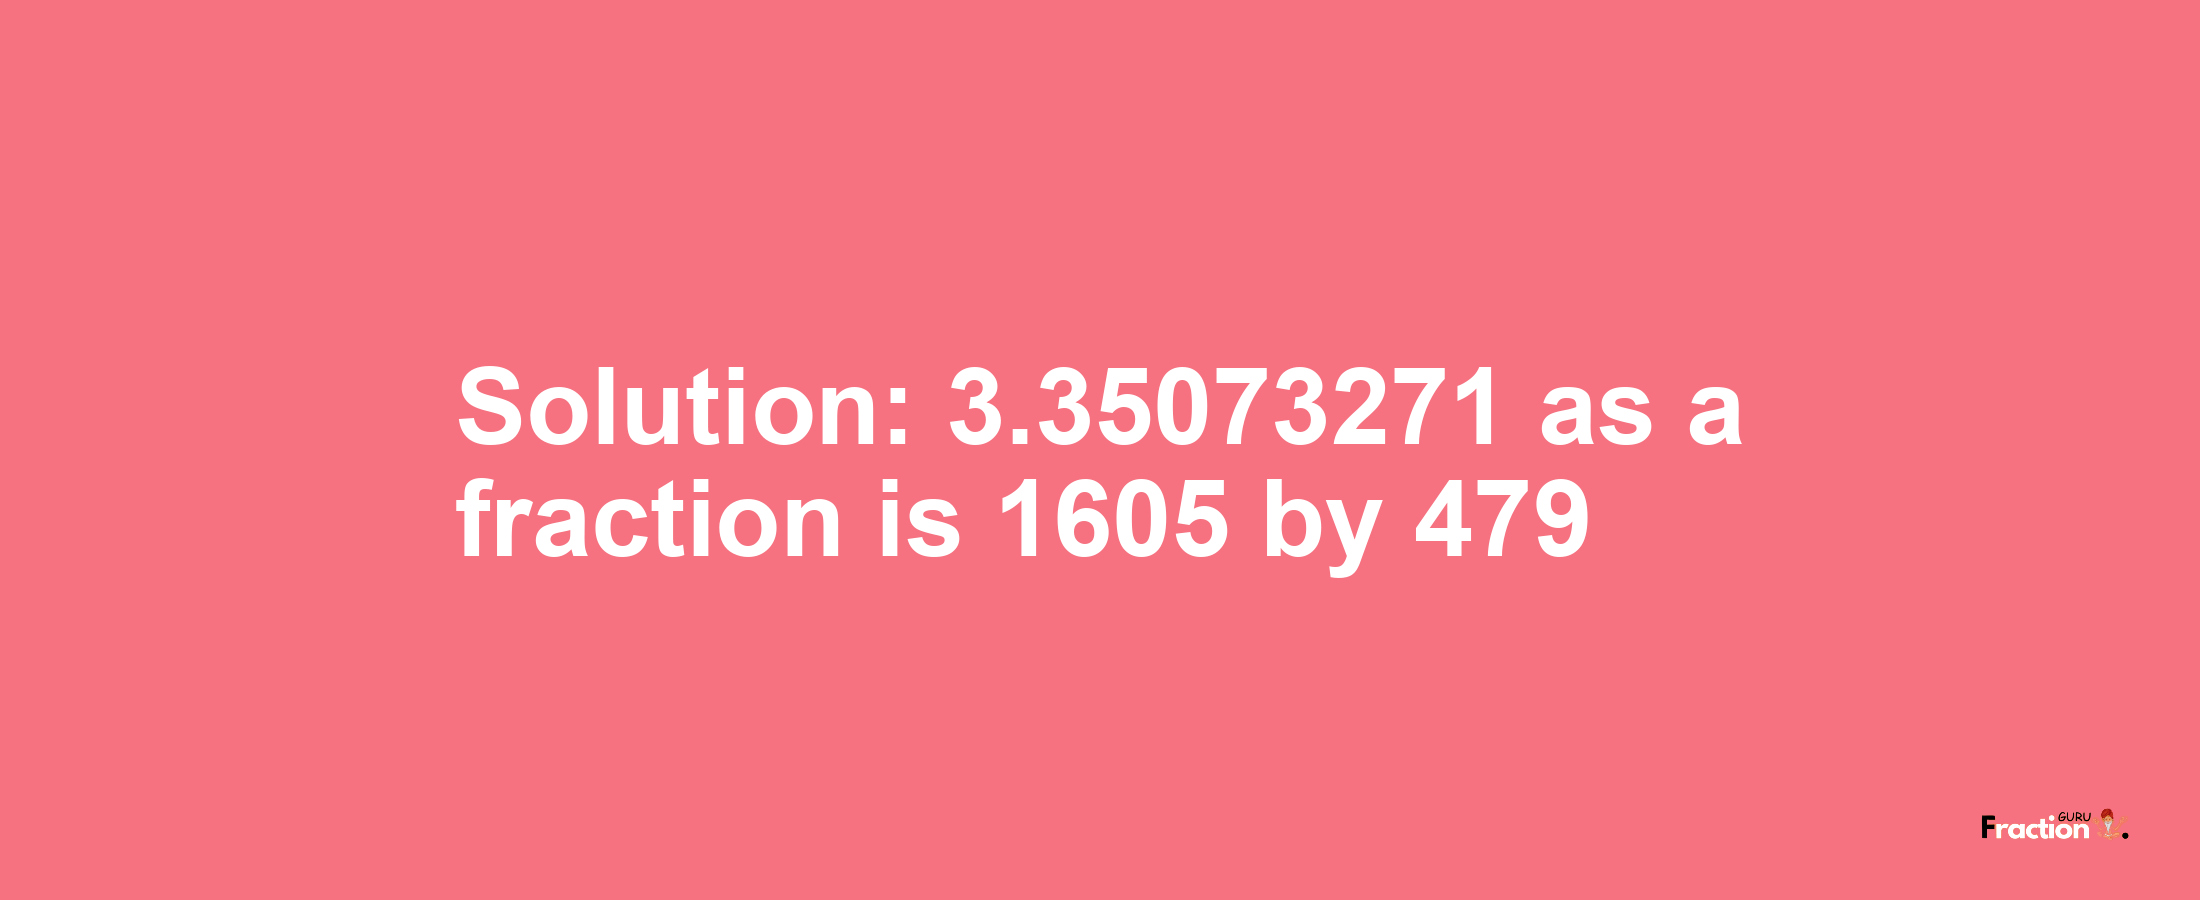 Solution:3.35073271 as a fraction is 1605/479